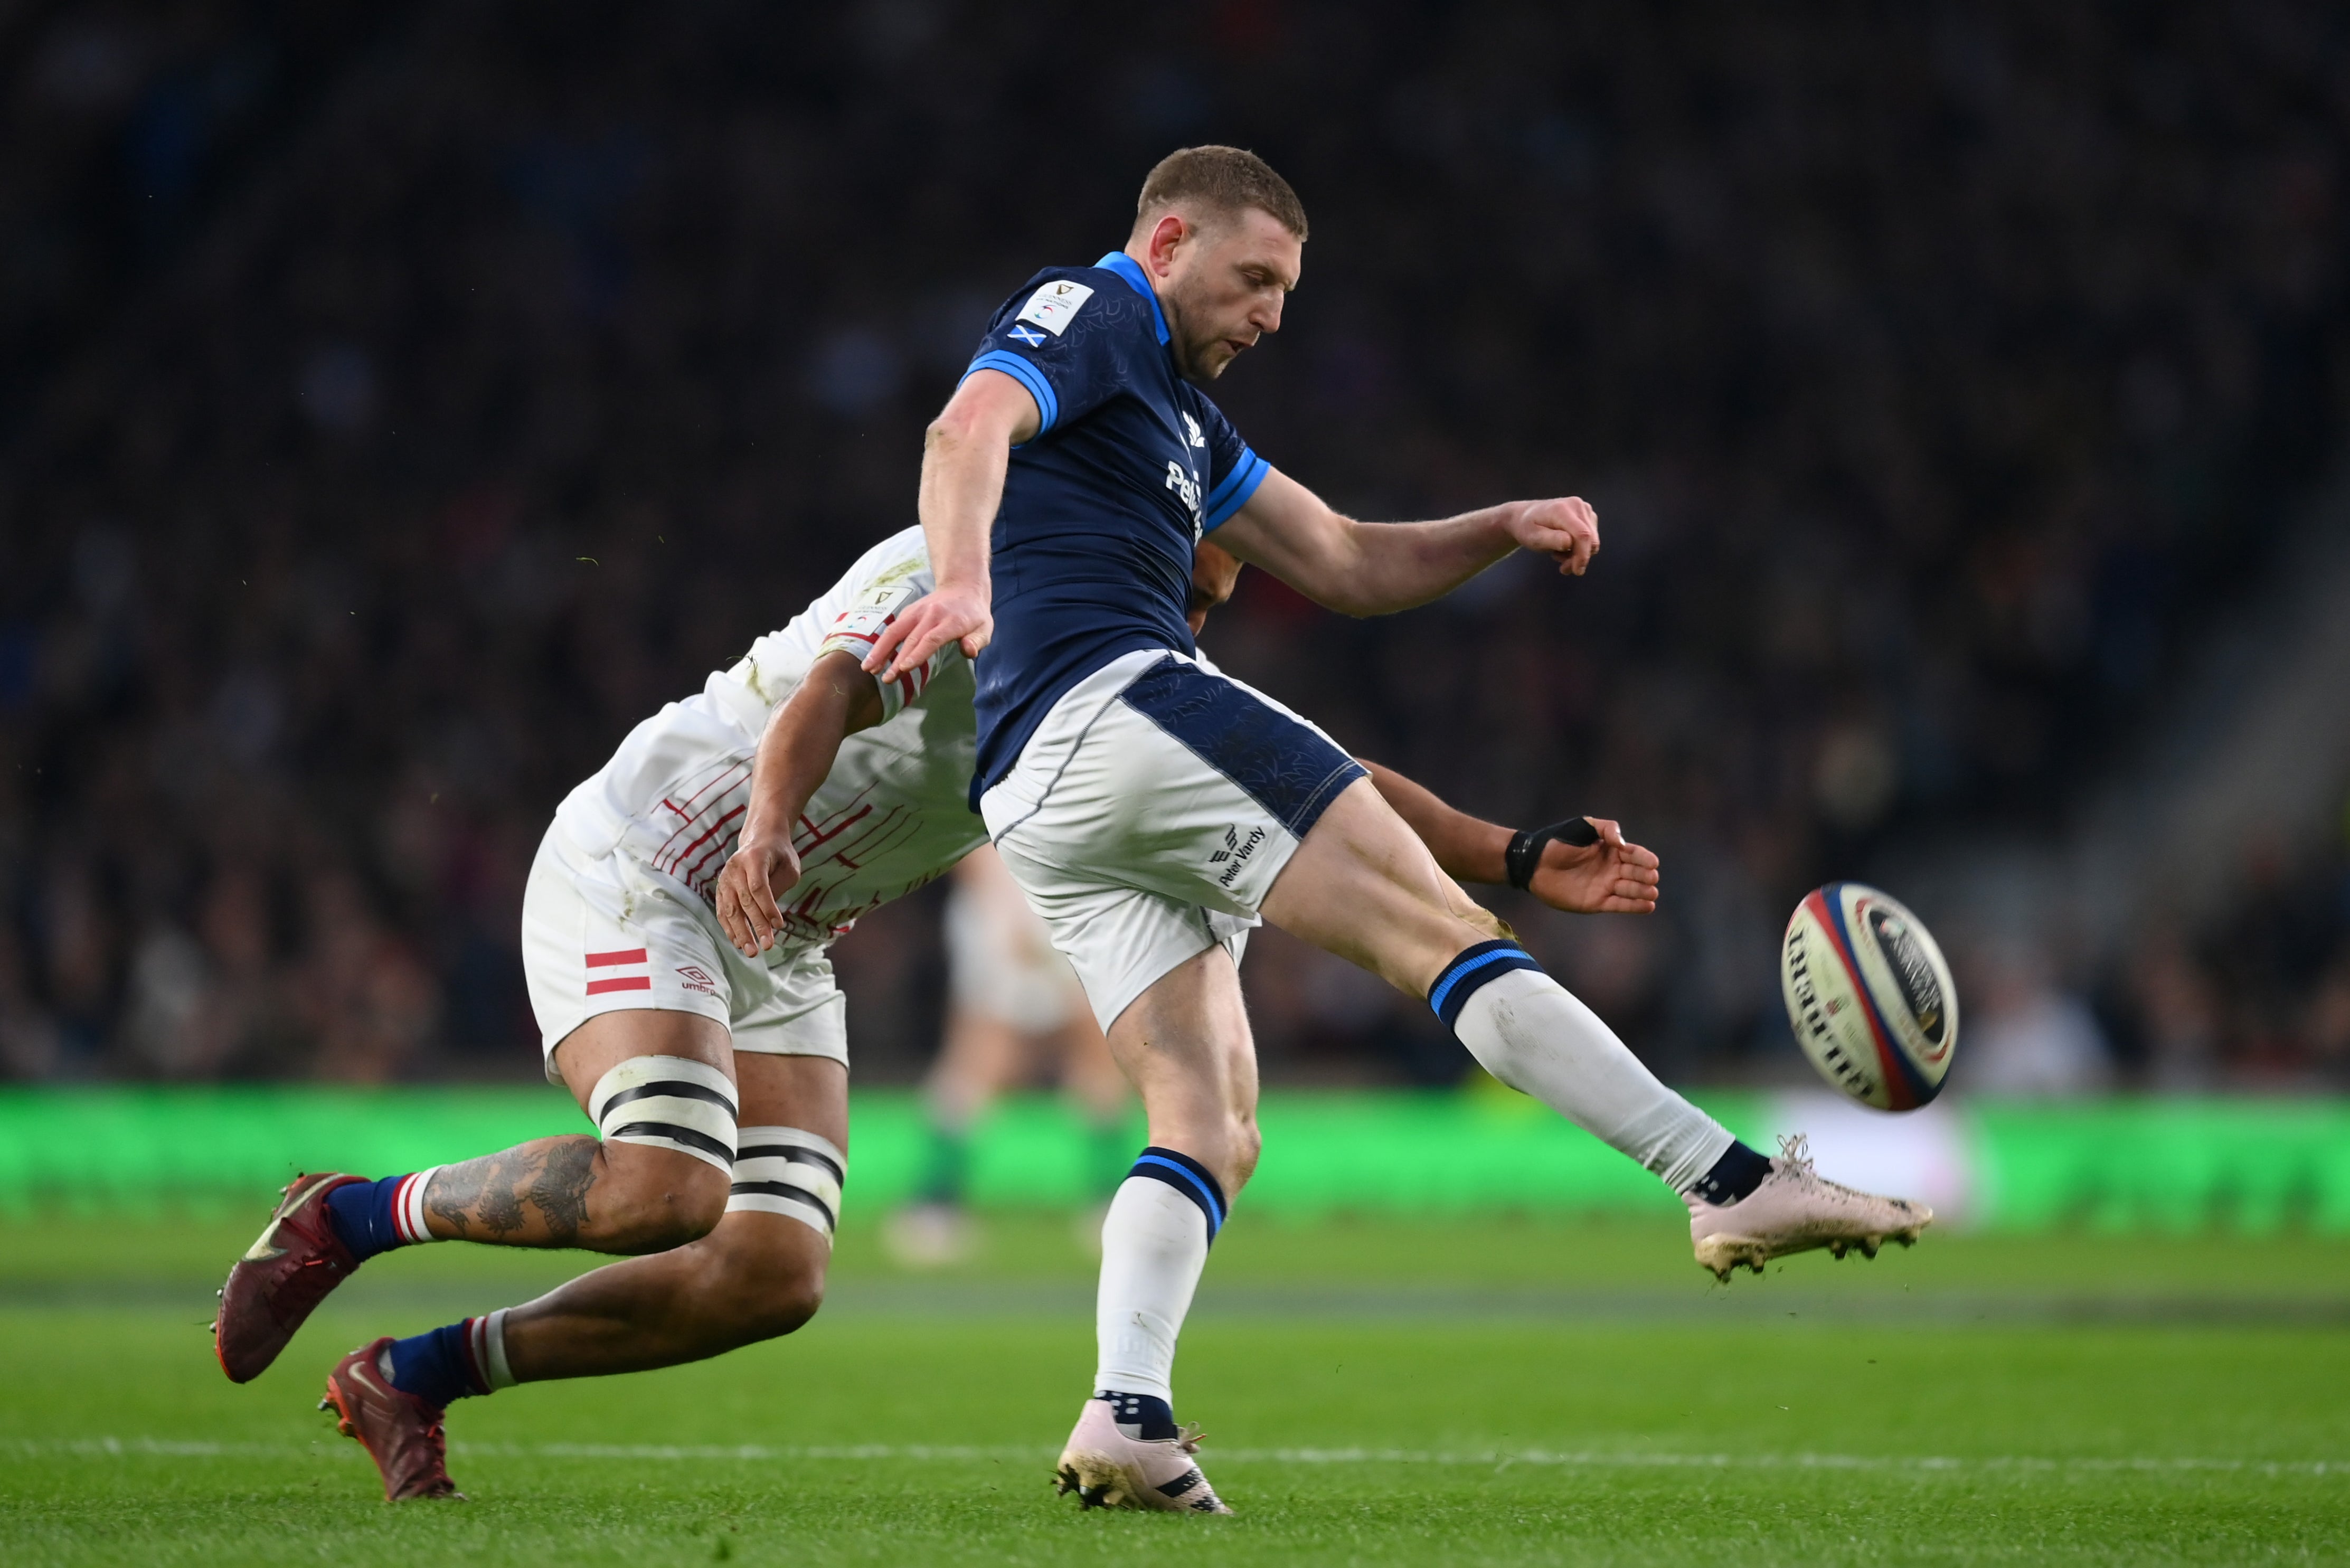 Hassling Finn Russell will be key for England